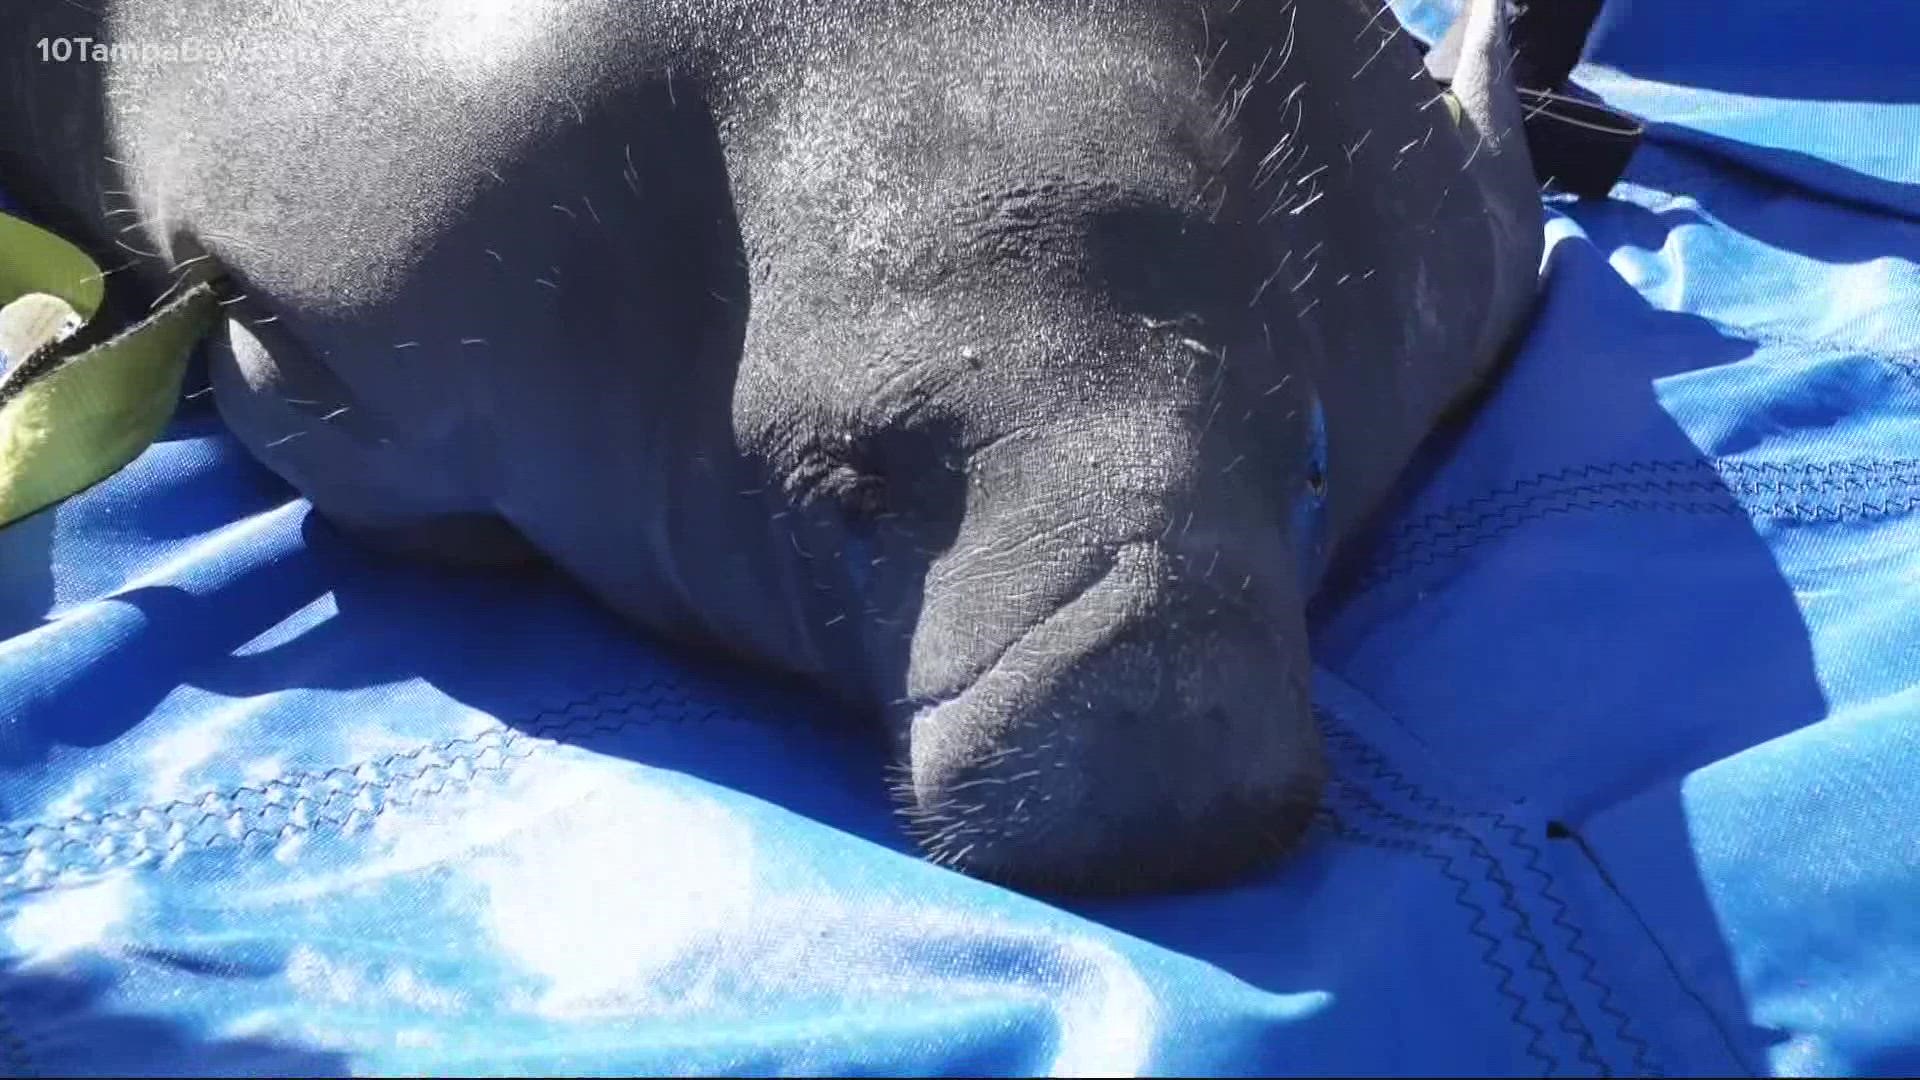 Chandler the manatee spent a year rehabbing at ZooTampa's David A. Straz Jr. Manatee Critical Care Center.